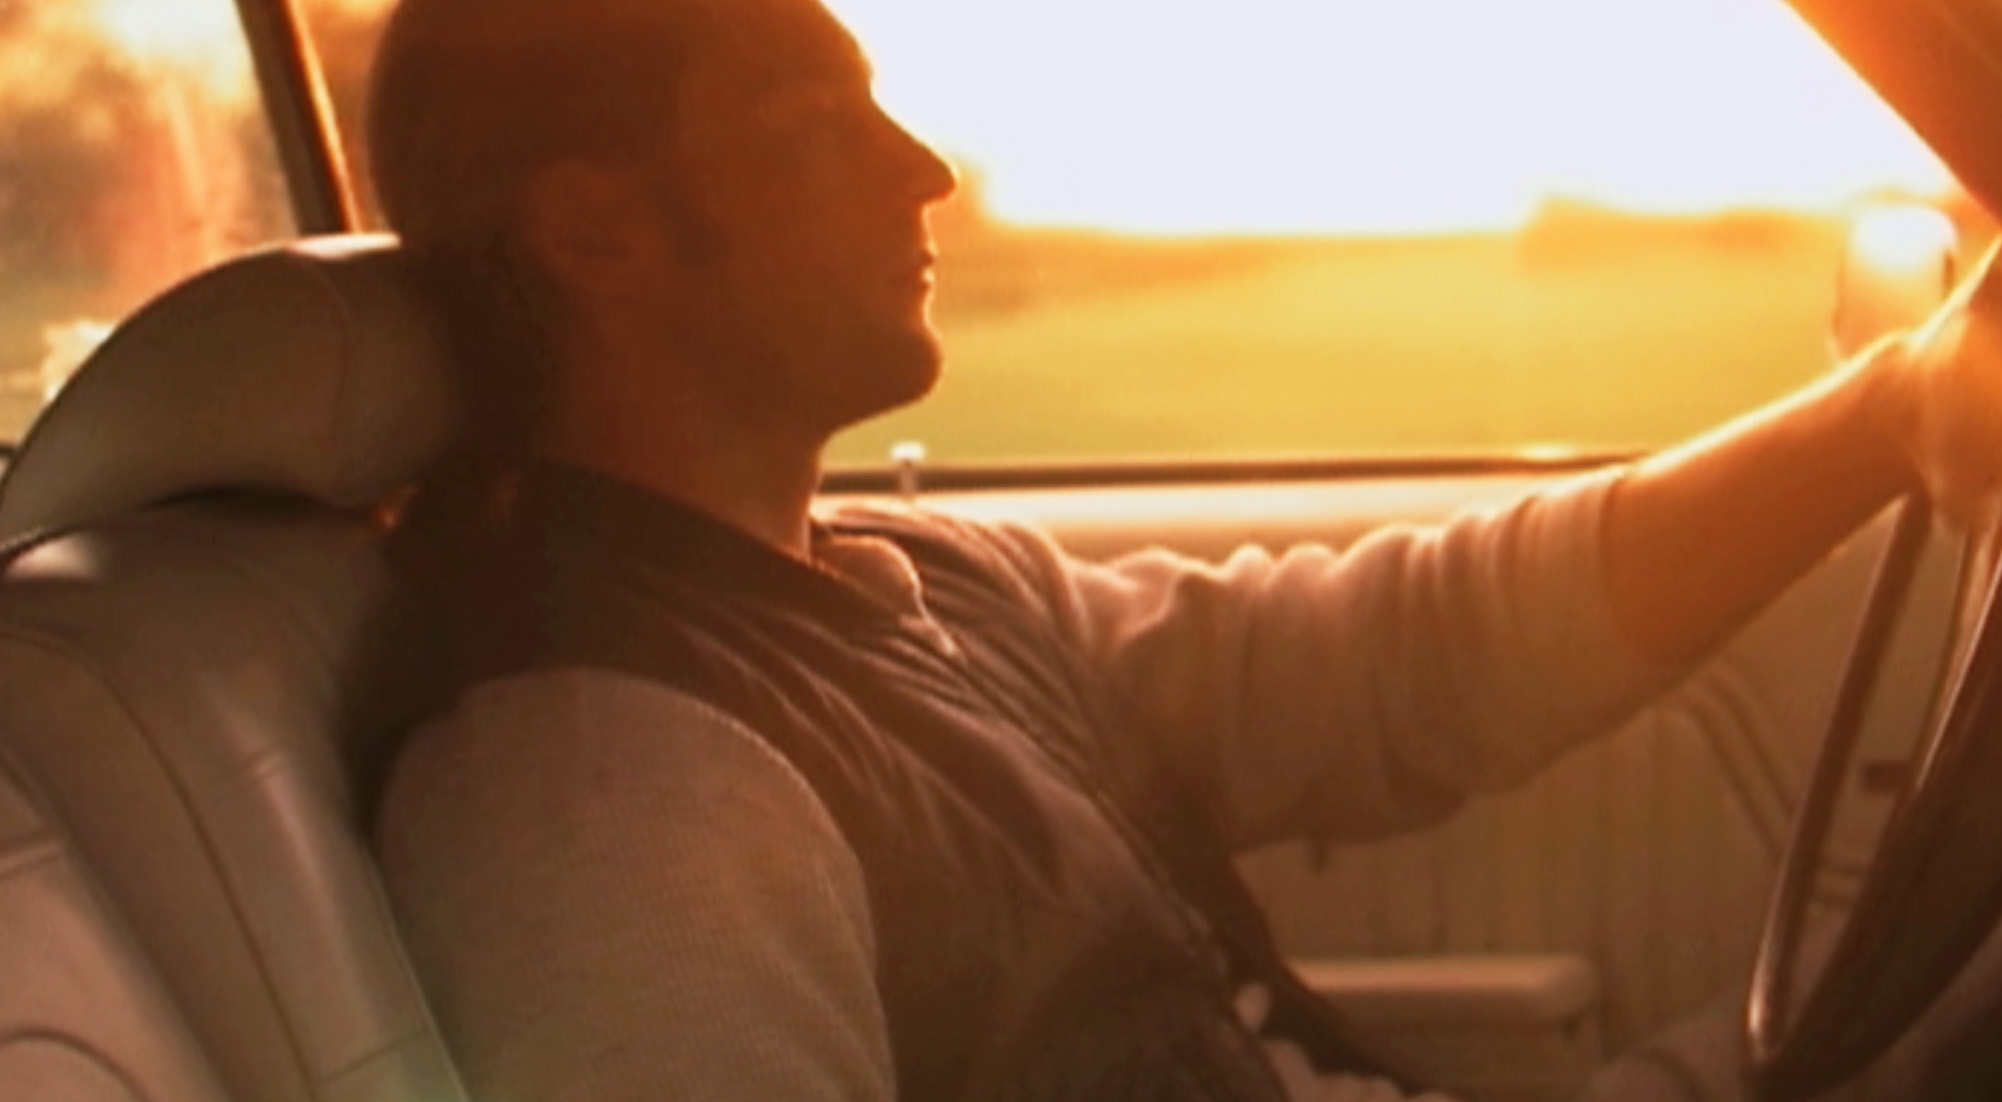 A man sitting in the back of a car looking out at the sunset.